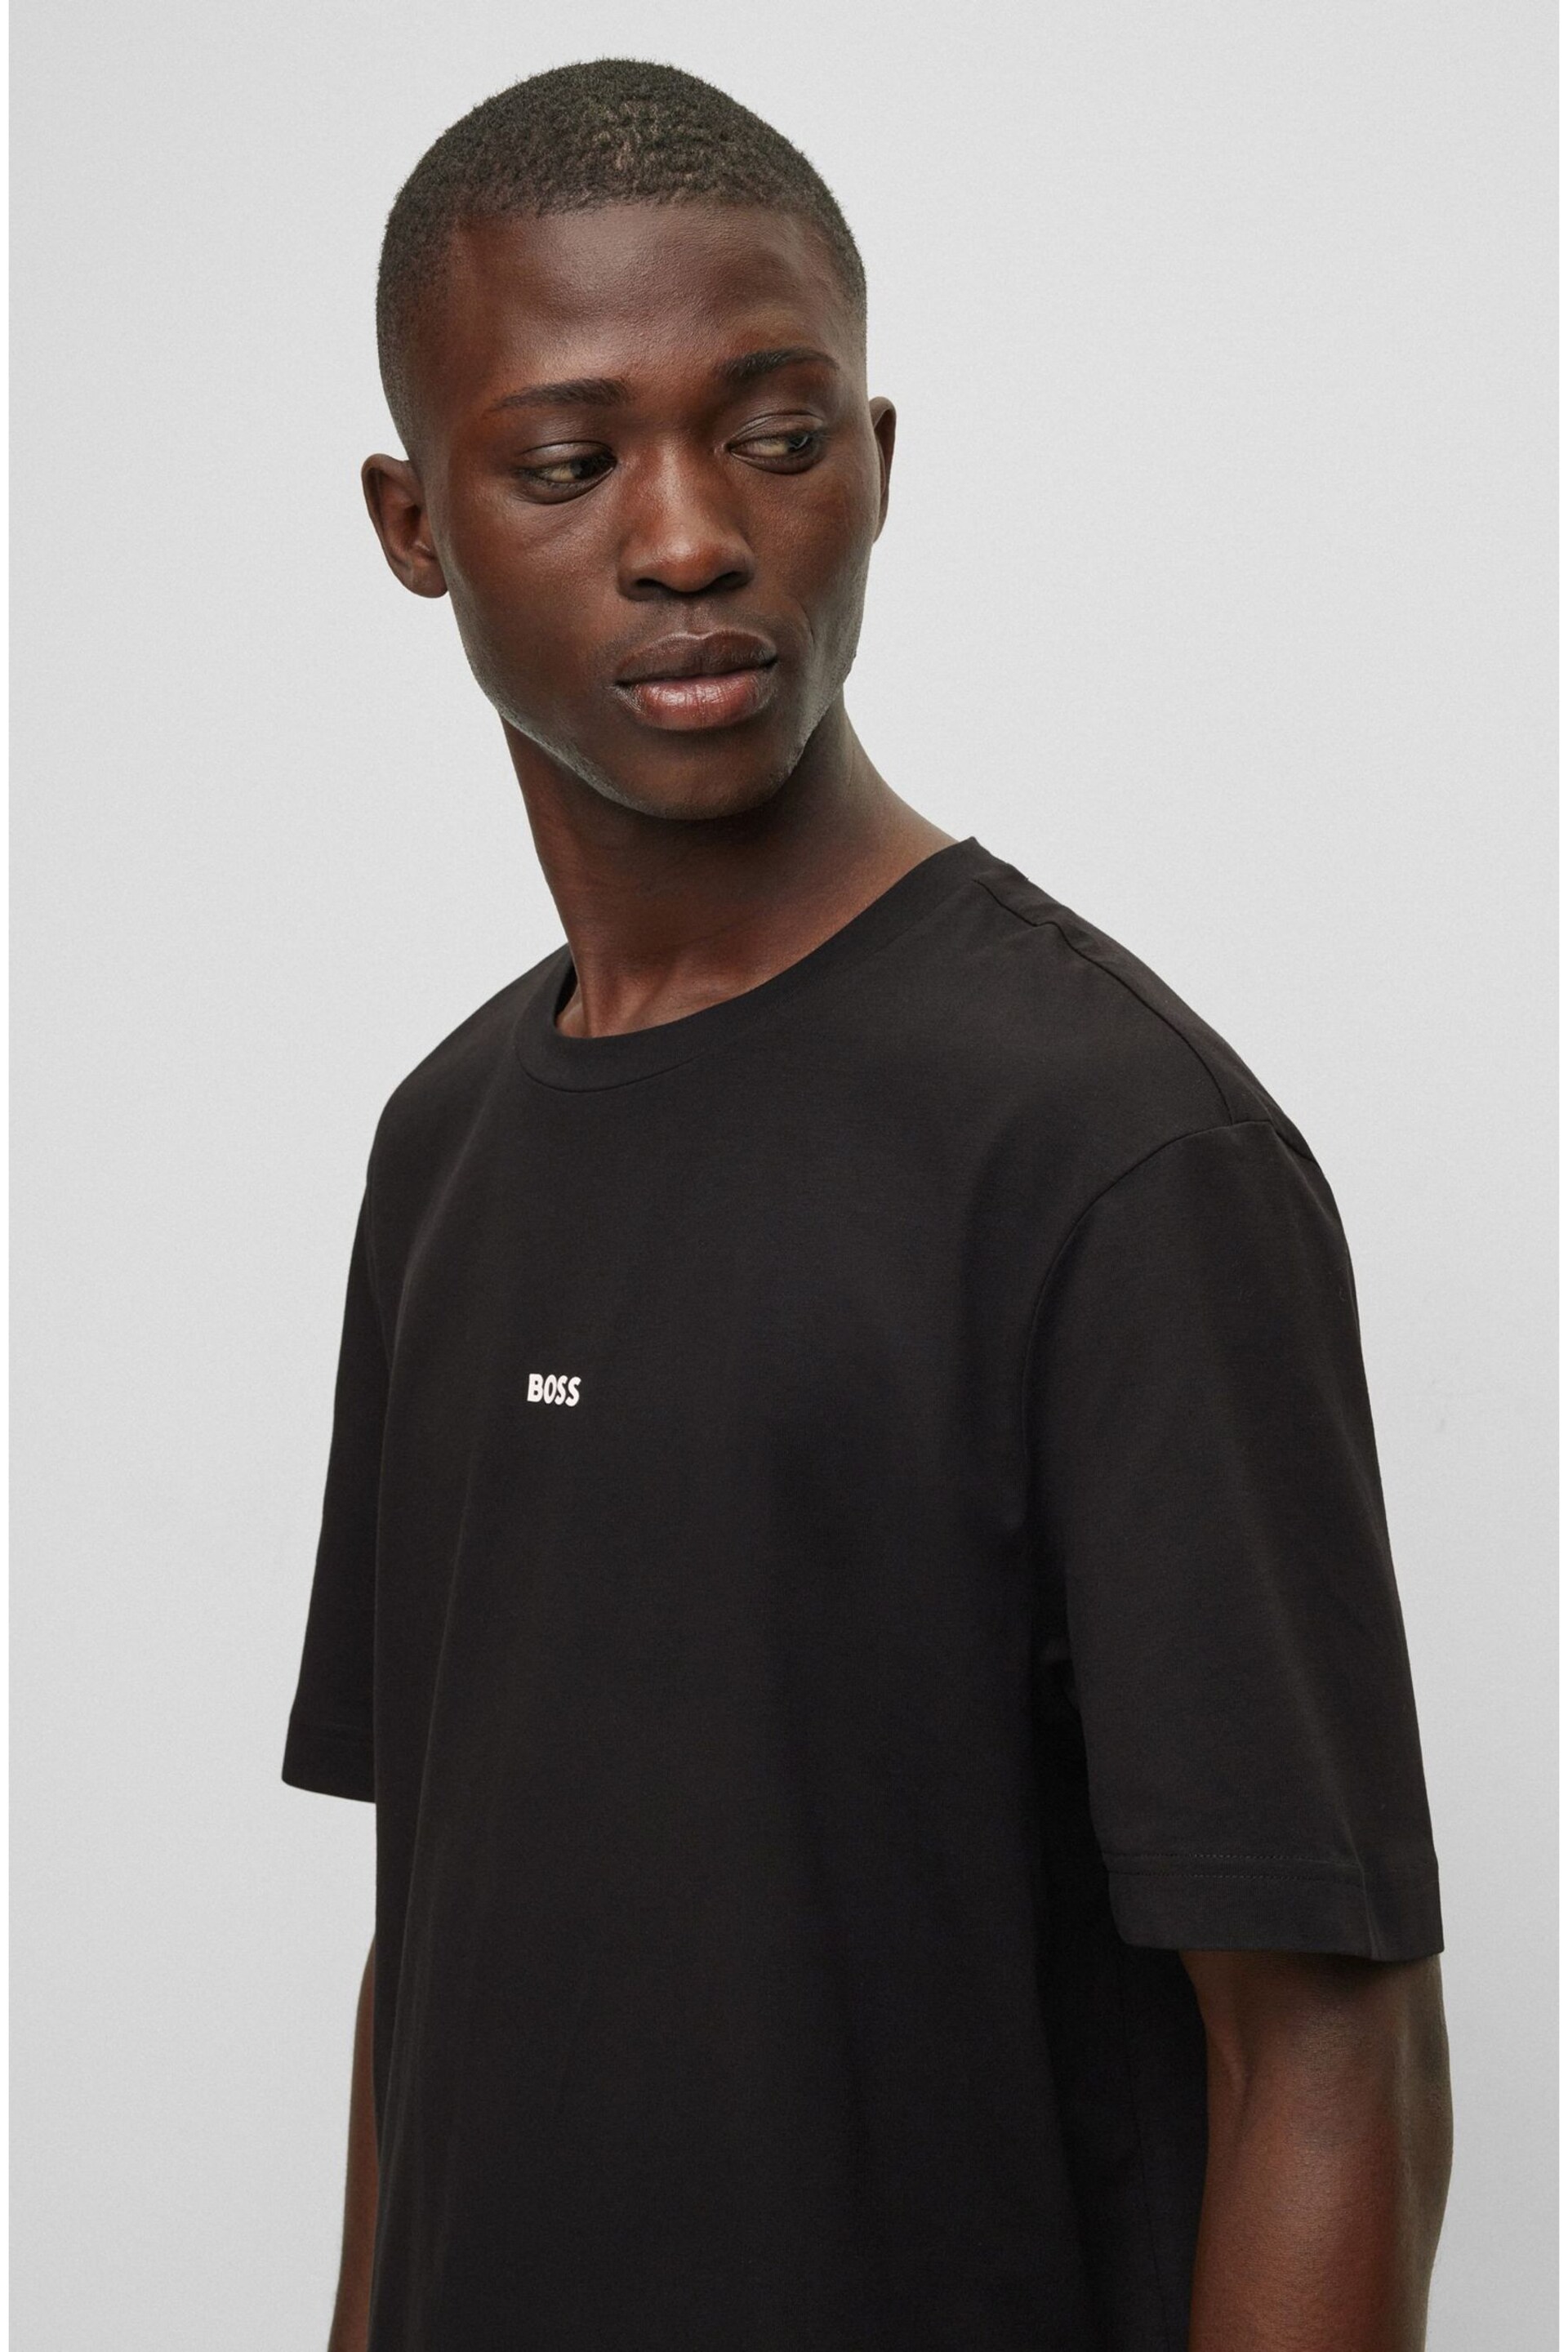 BOSS Black Relaxed Fit Central Logo T-Shirt - Image 4 of 4